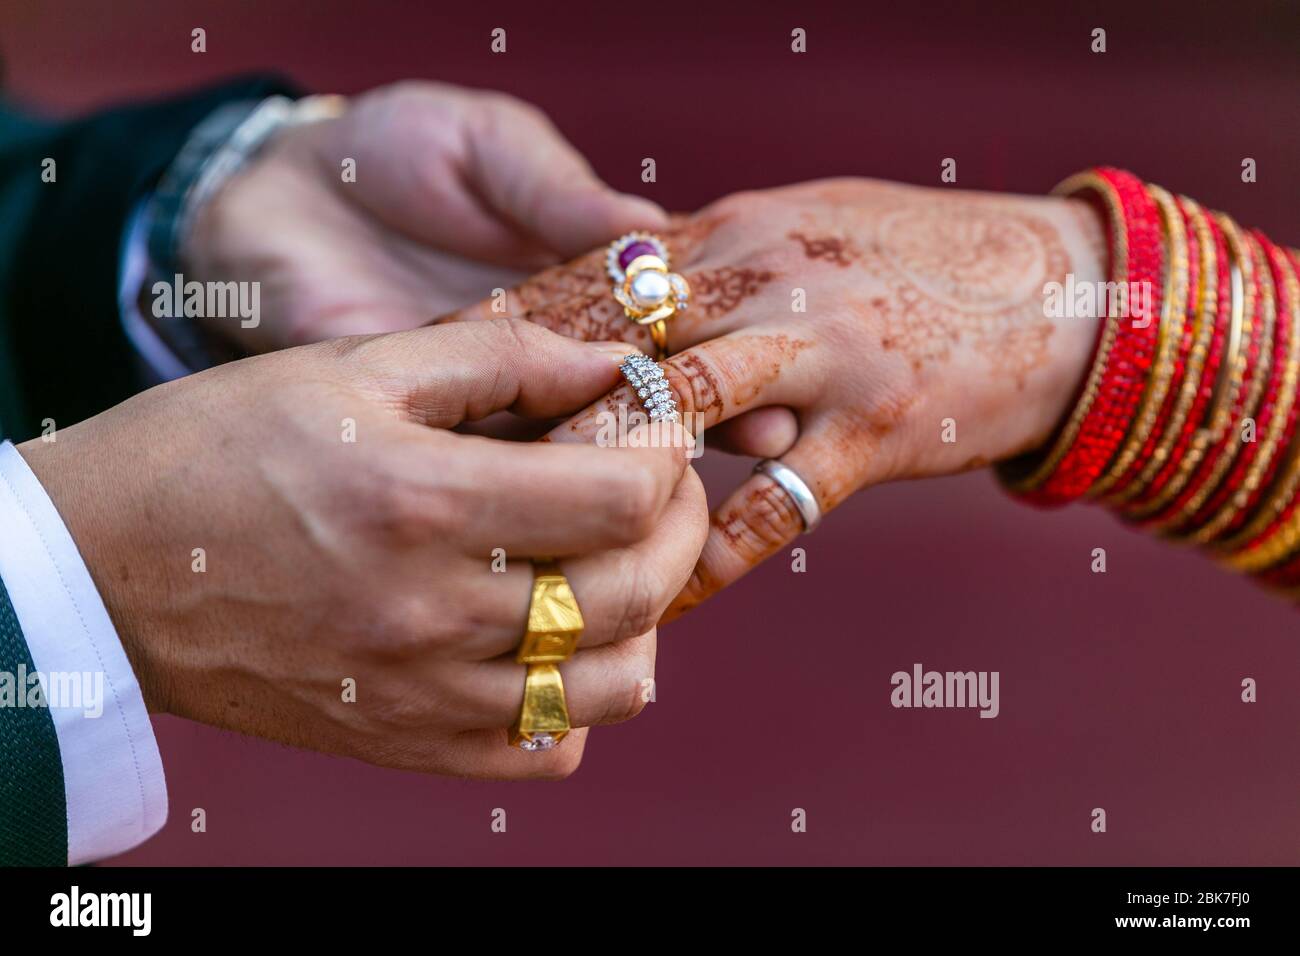 8 Hindu Engagement Traditions and Pre-Wedding Ceremonies